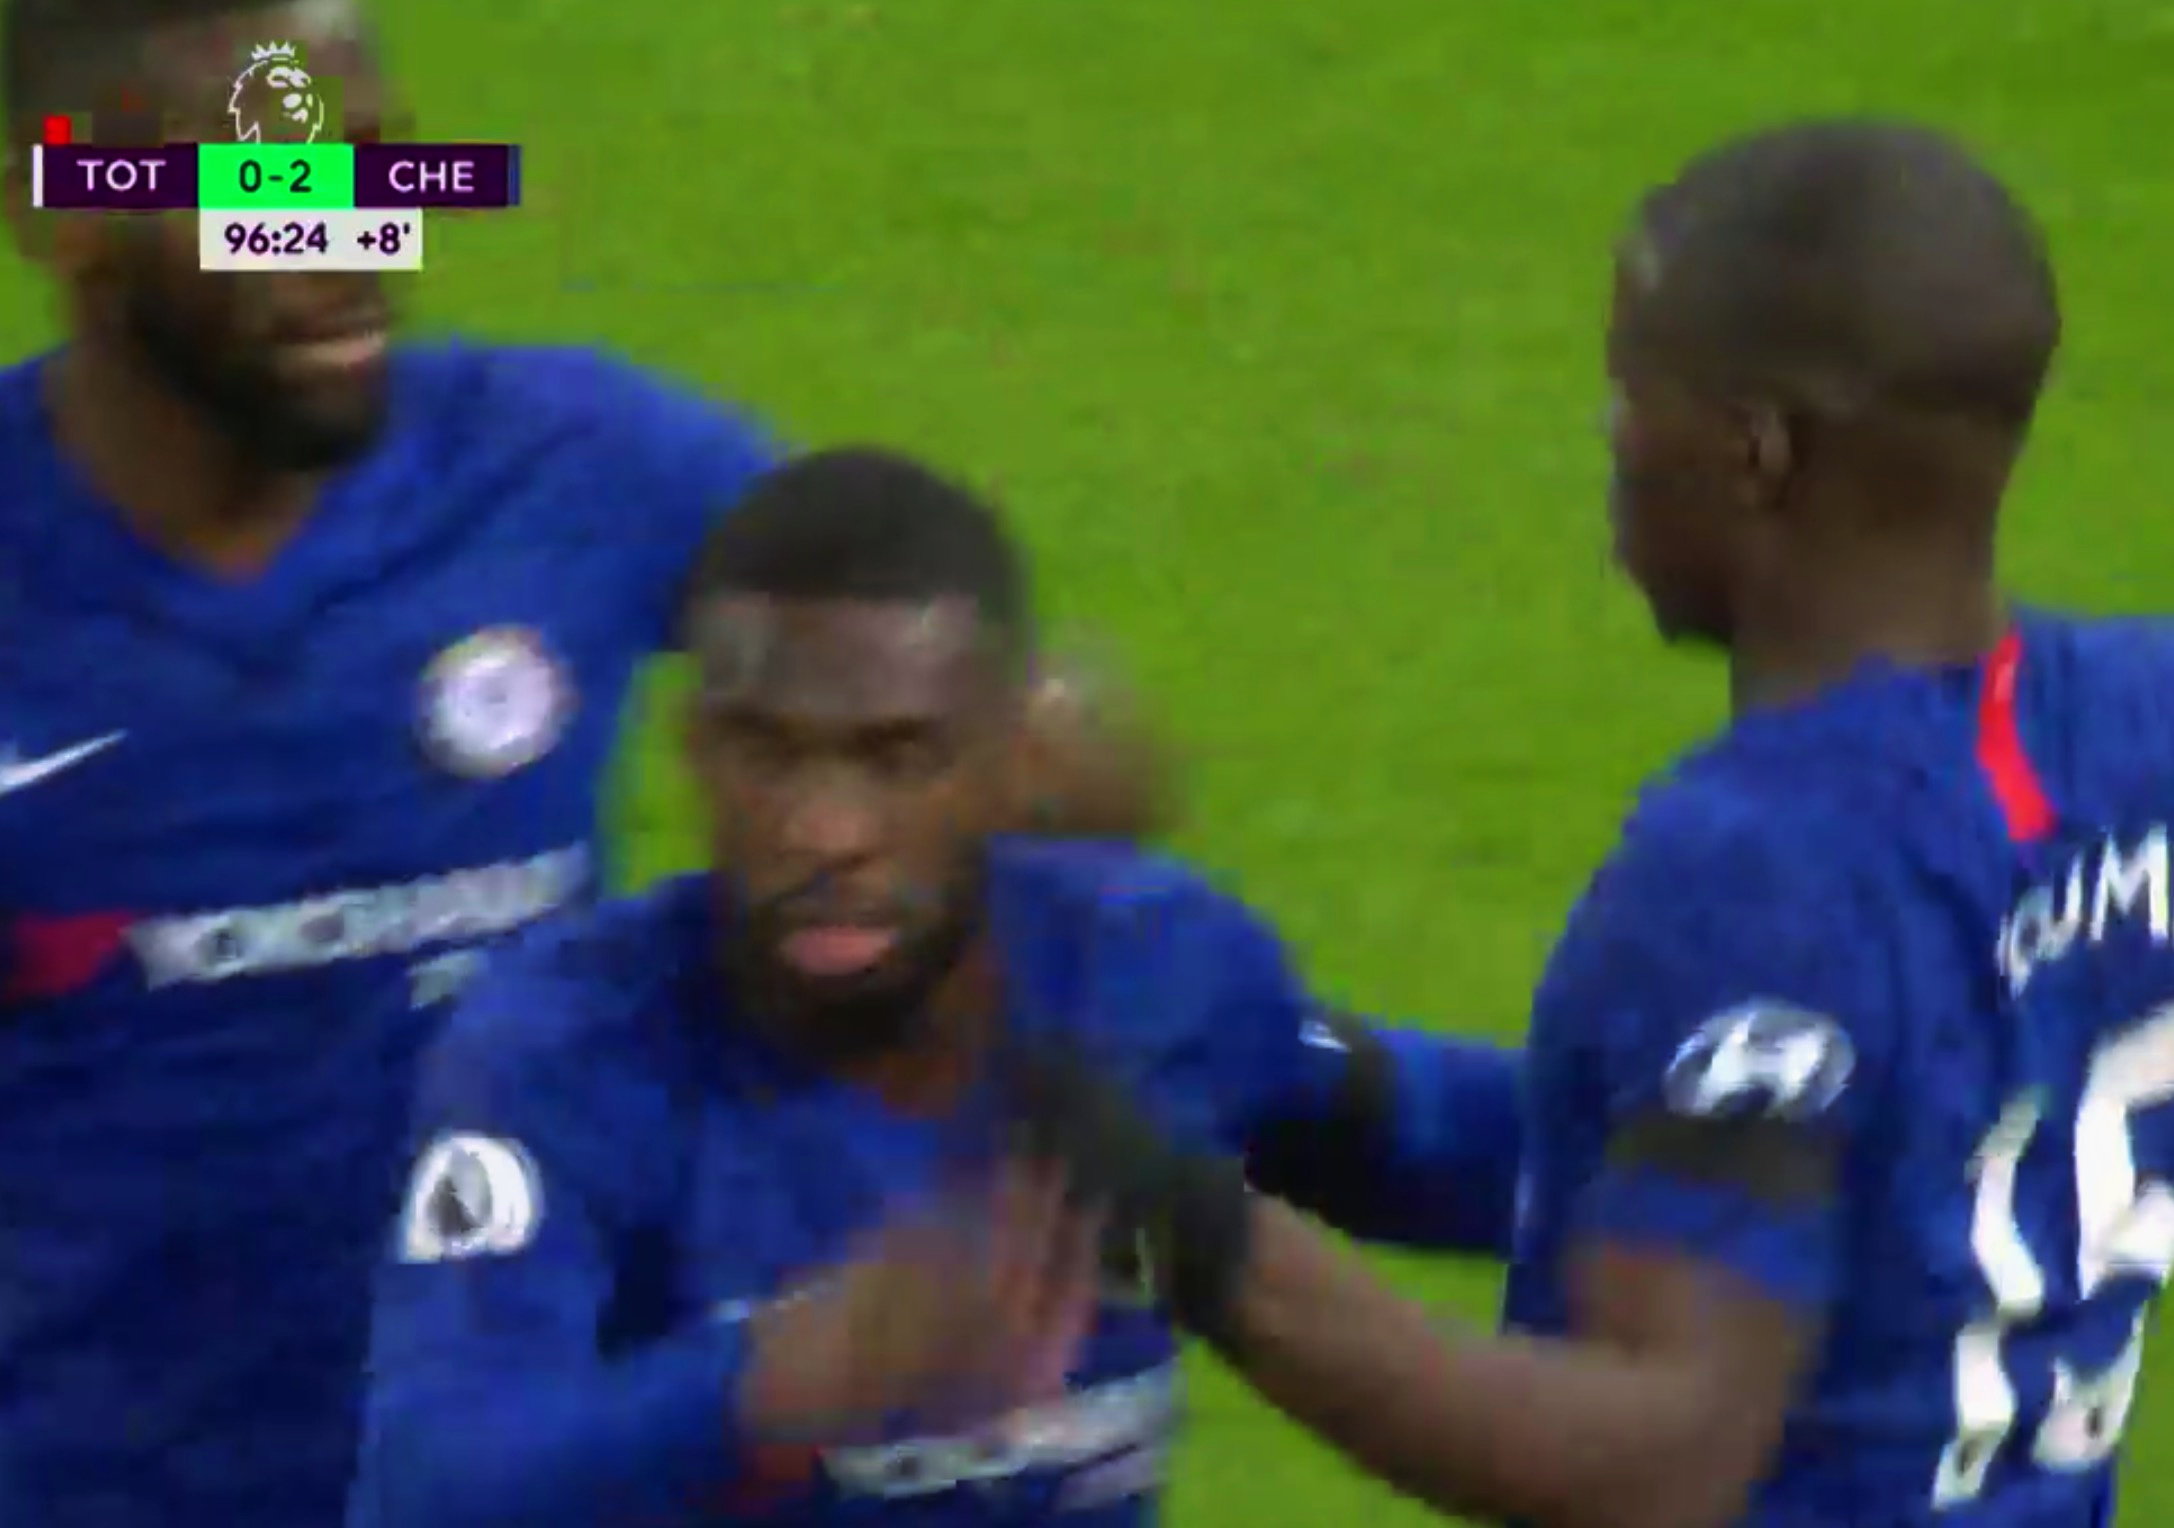 Chelsea fans loved how Rudiger, Tomori and Zouma celebrated clearing a Spurs attack on Sunday